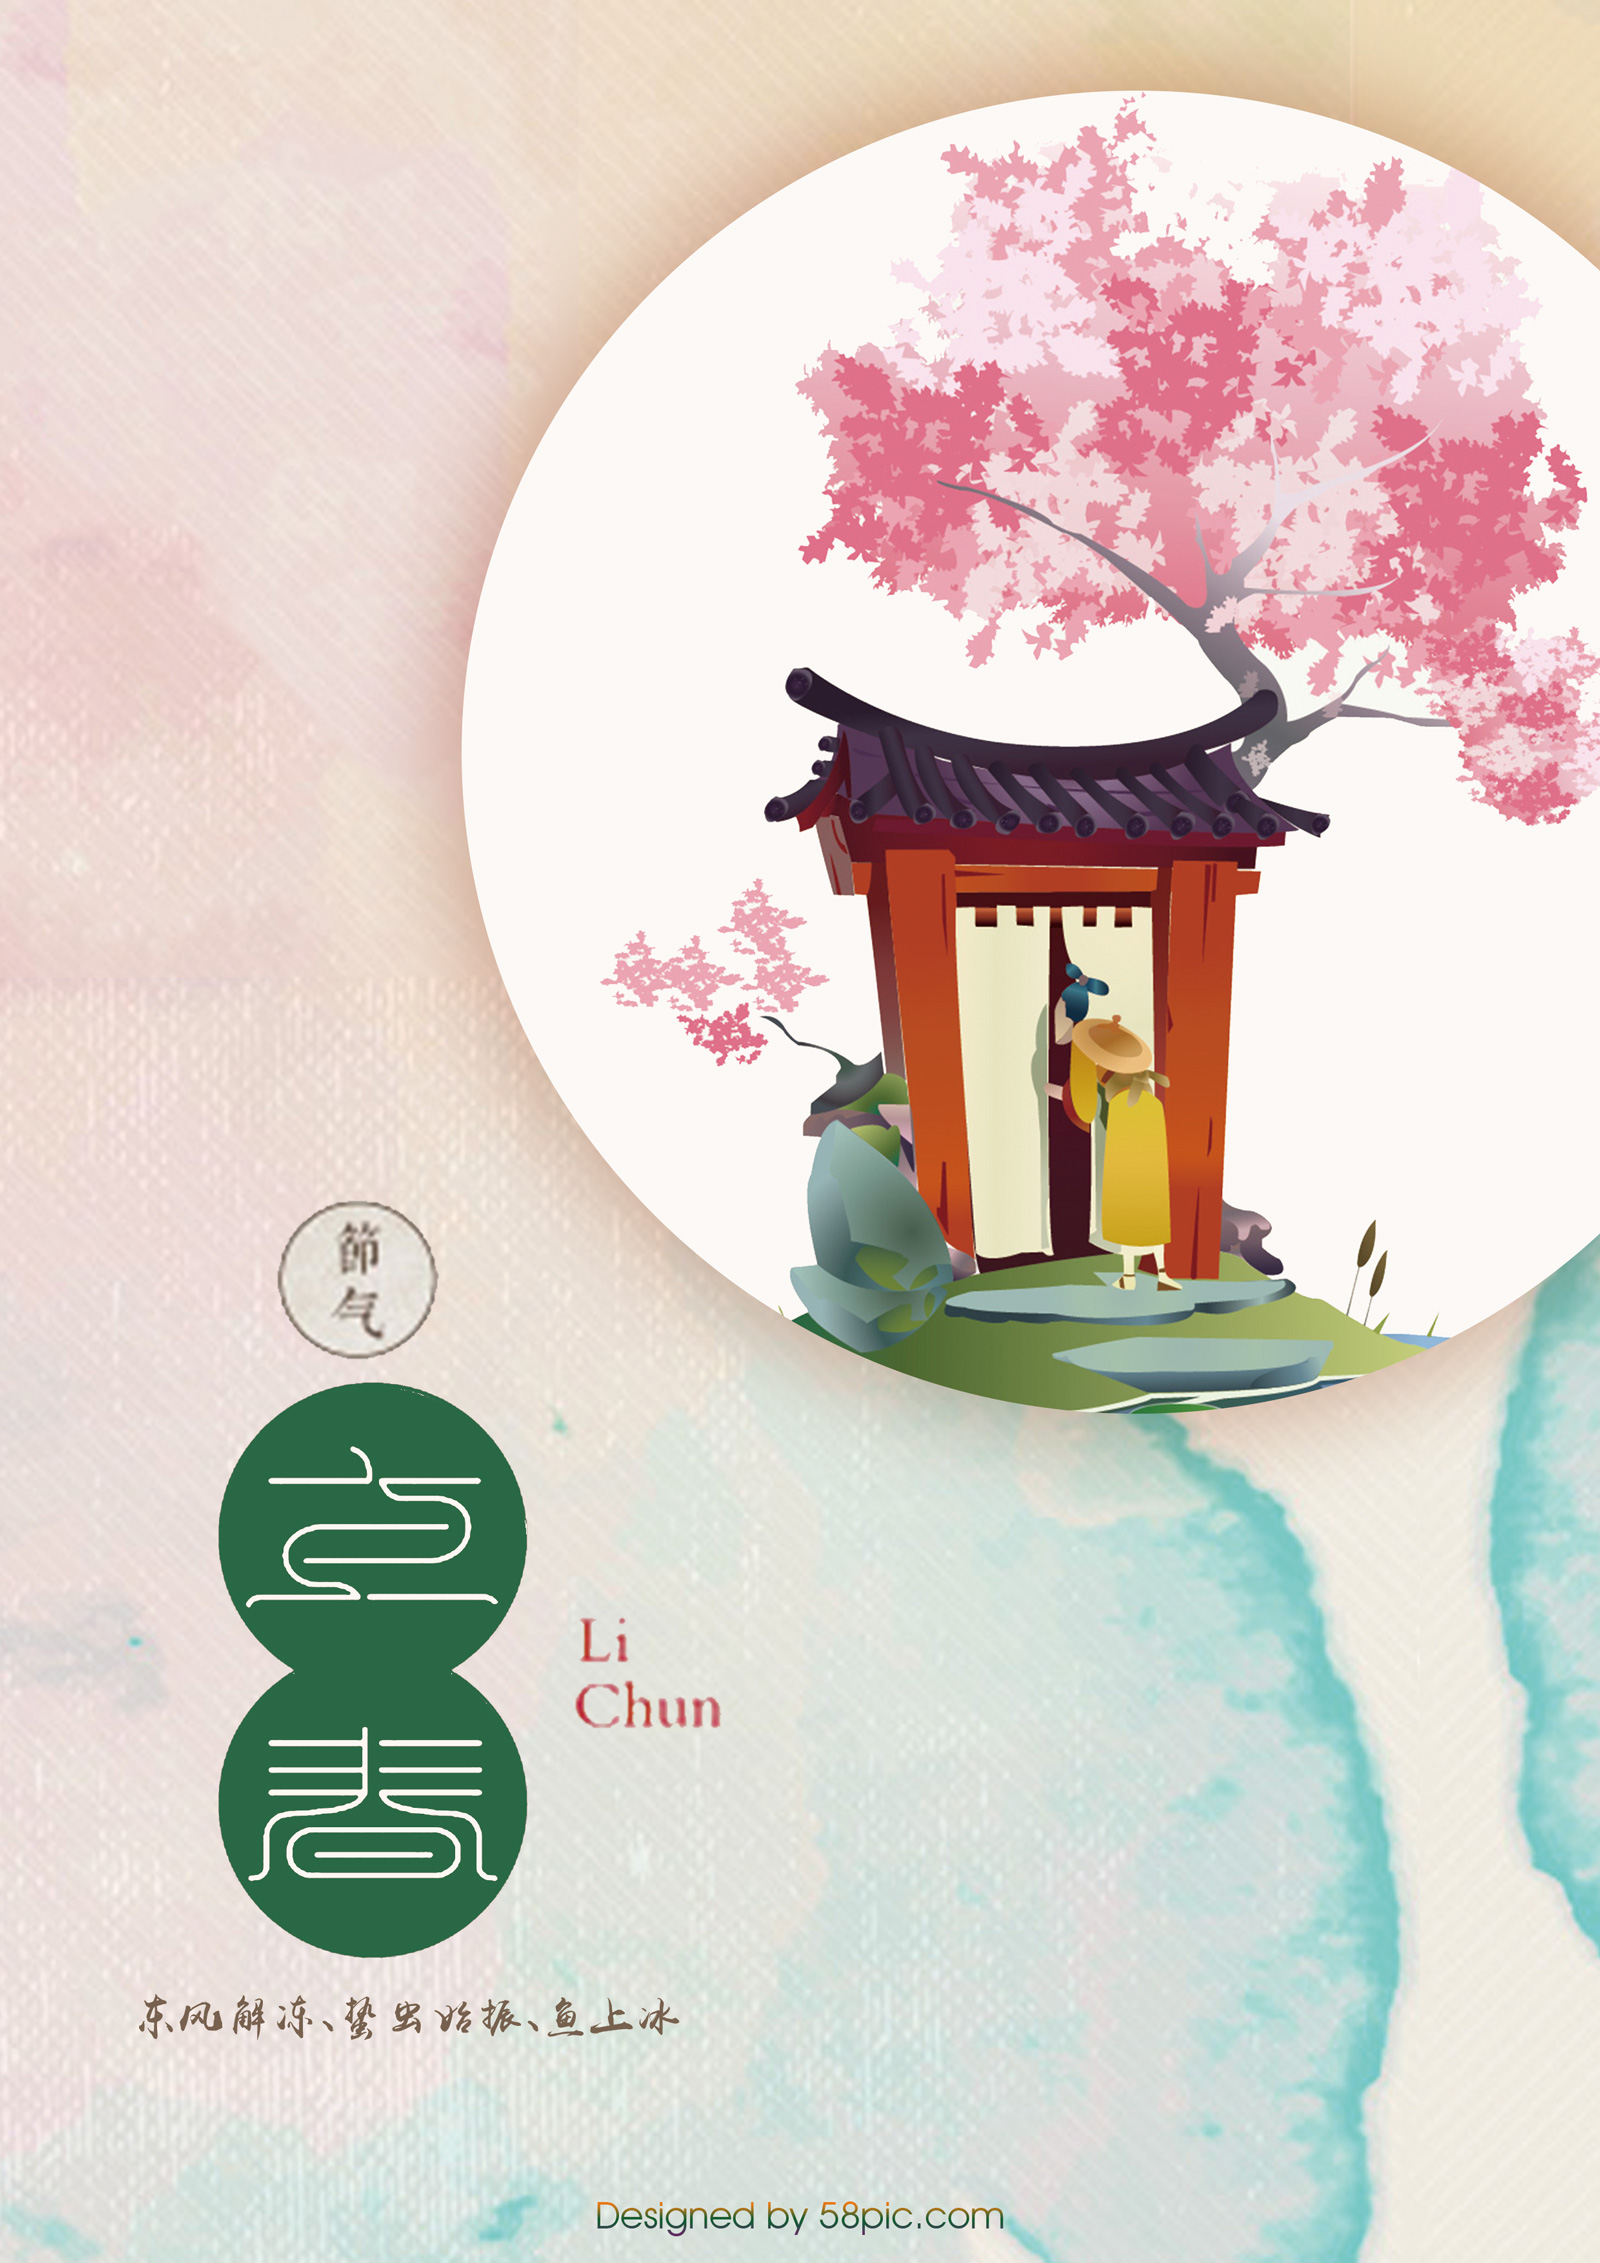 The spring of China is here PSD File Free Download